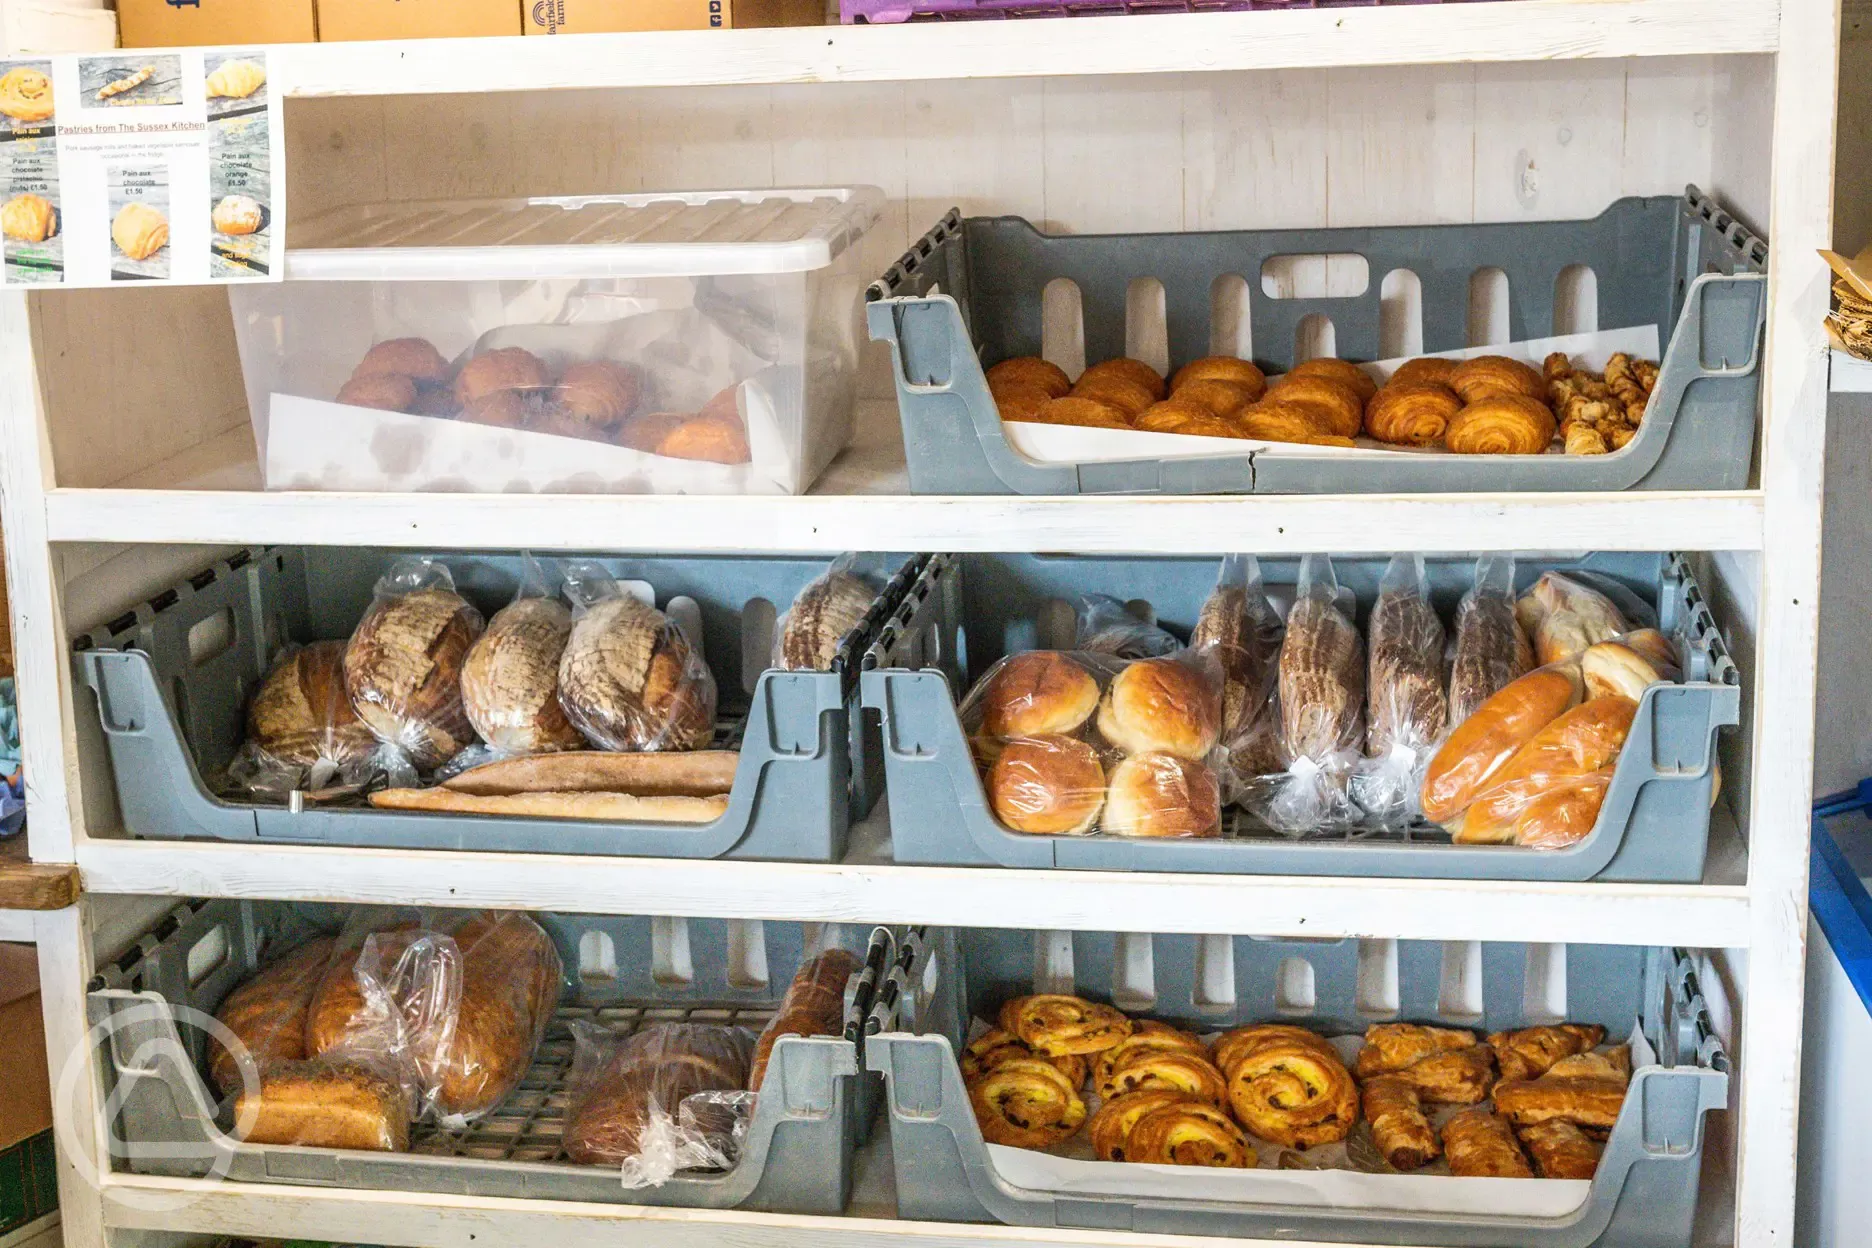 Bakery shelves in the onsite shop